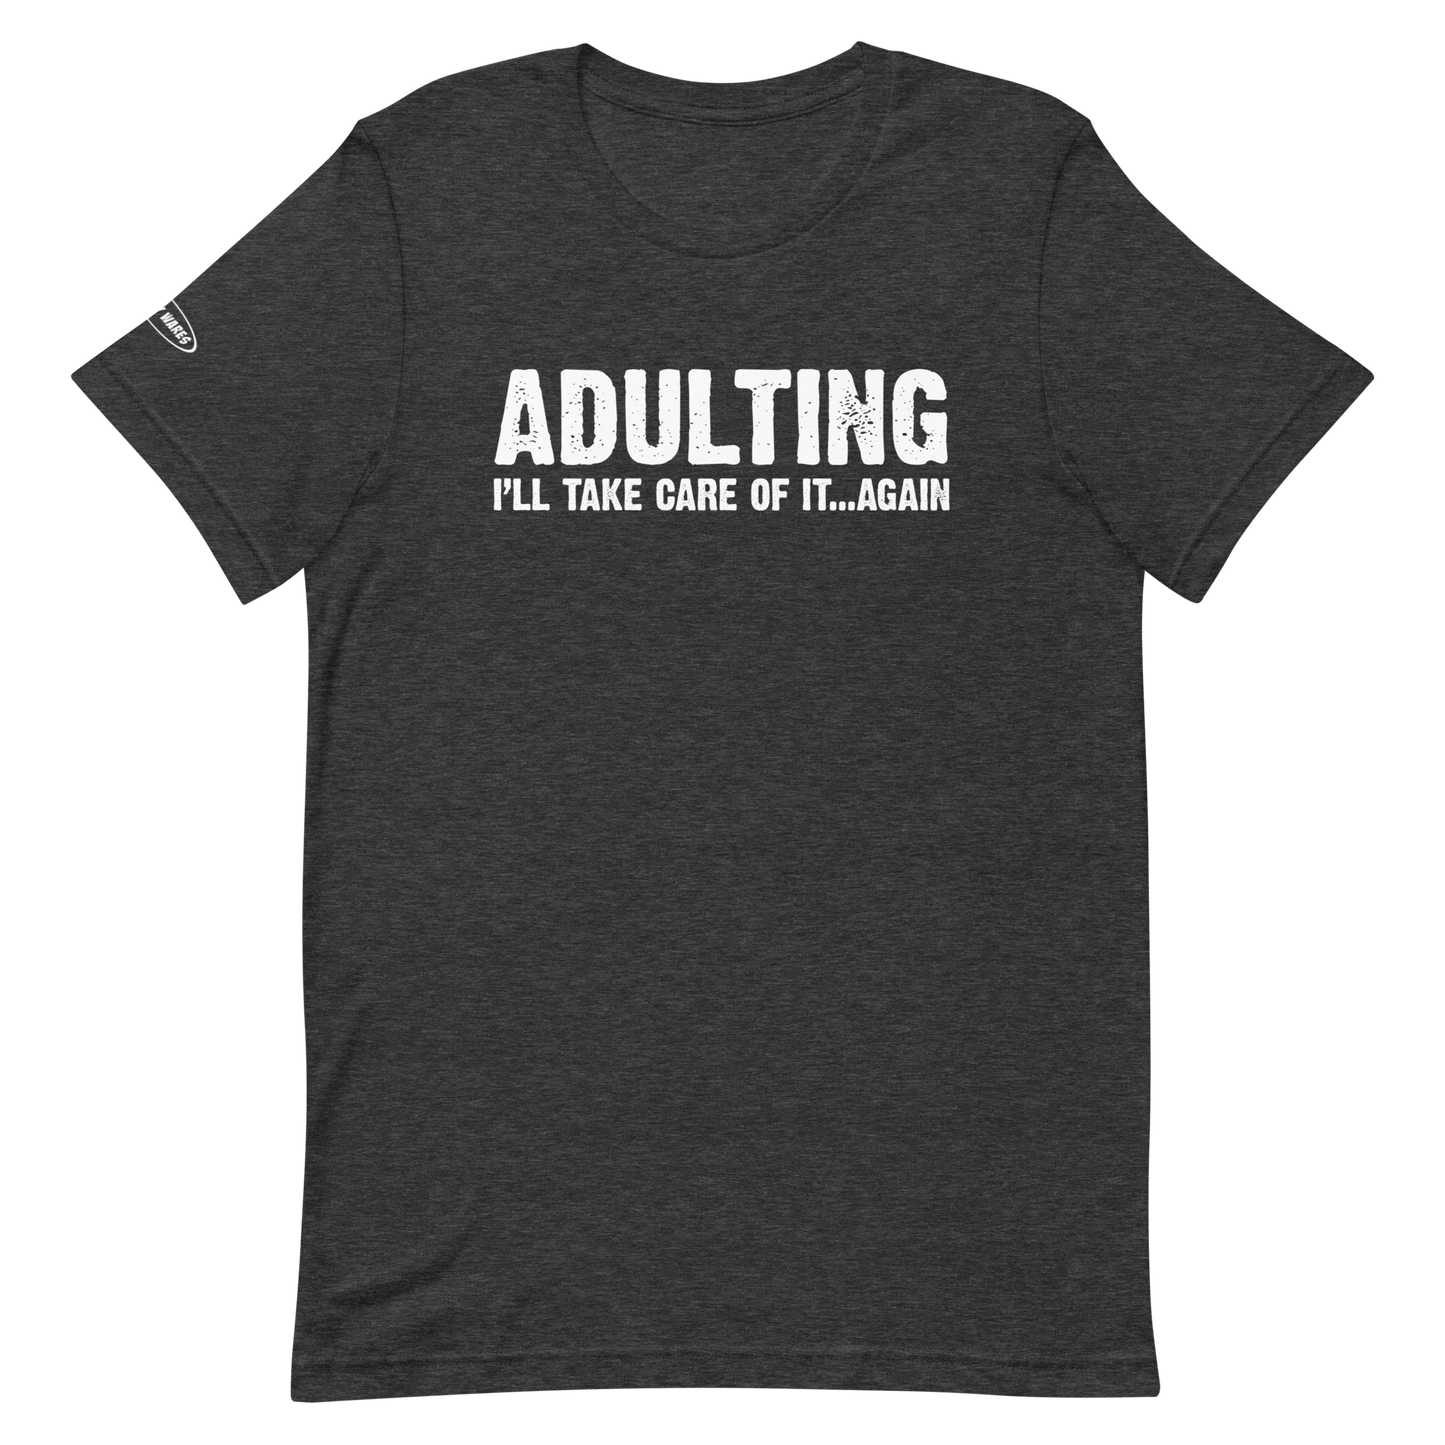 Adulting, I'll take care of it ... again - Funny T-Shirt